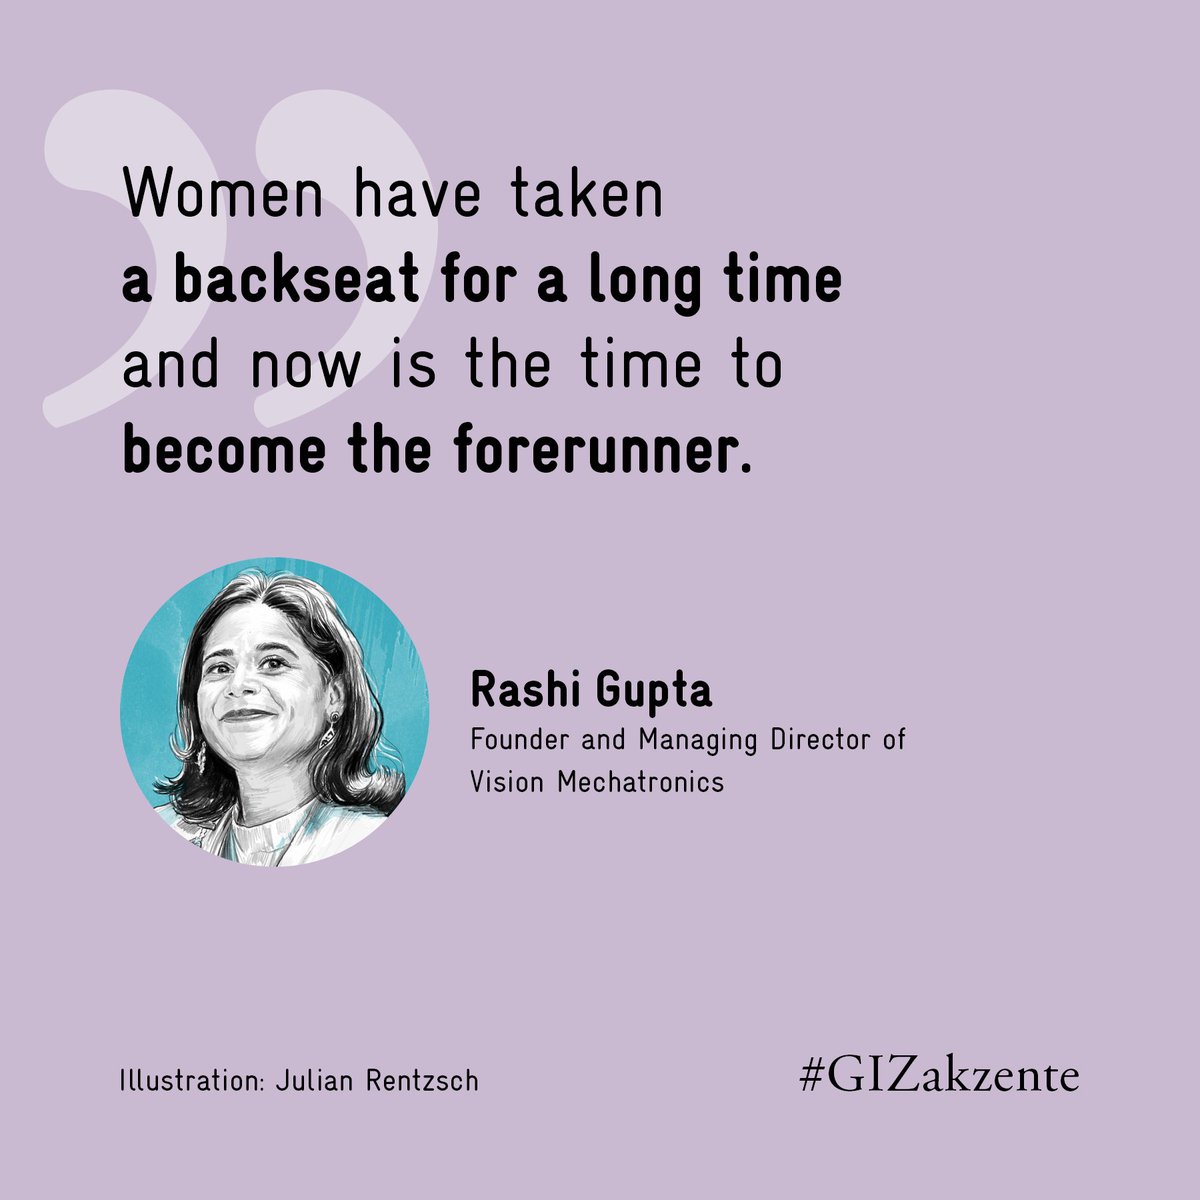 Rashi Gupta creates equal opportunities for women in #STEM jobs at @VisionMechX. Find out at #GIZakzente why gender equality is particularly important in the energy sector, and what the challenges are: akzente.giz.de/en/interview-r…